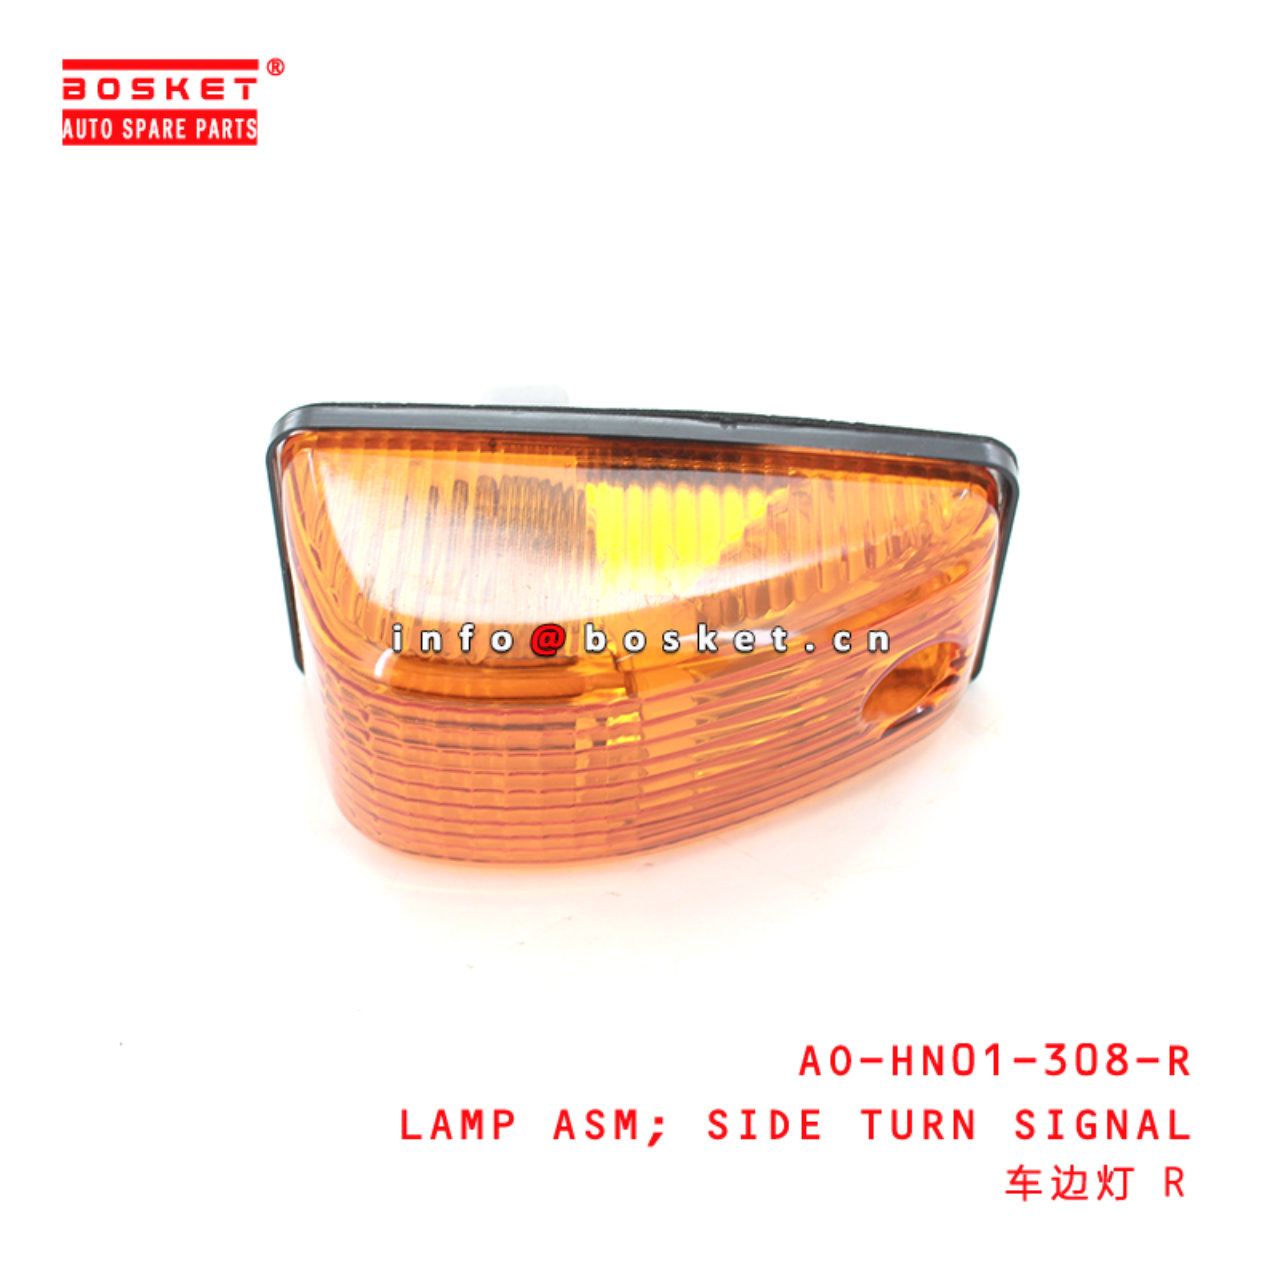 AO-HN01-308-R Side Turn Signal Lamp Assembly Suitable for ISUZU HINO300